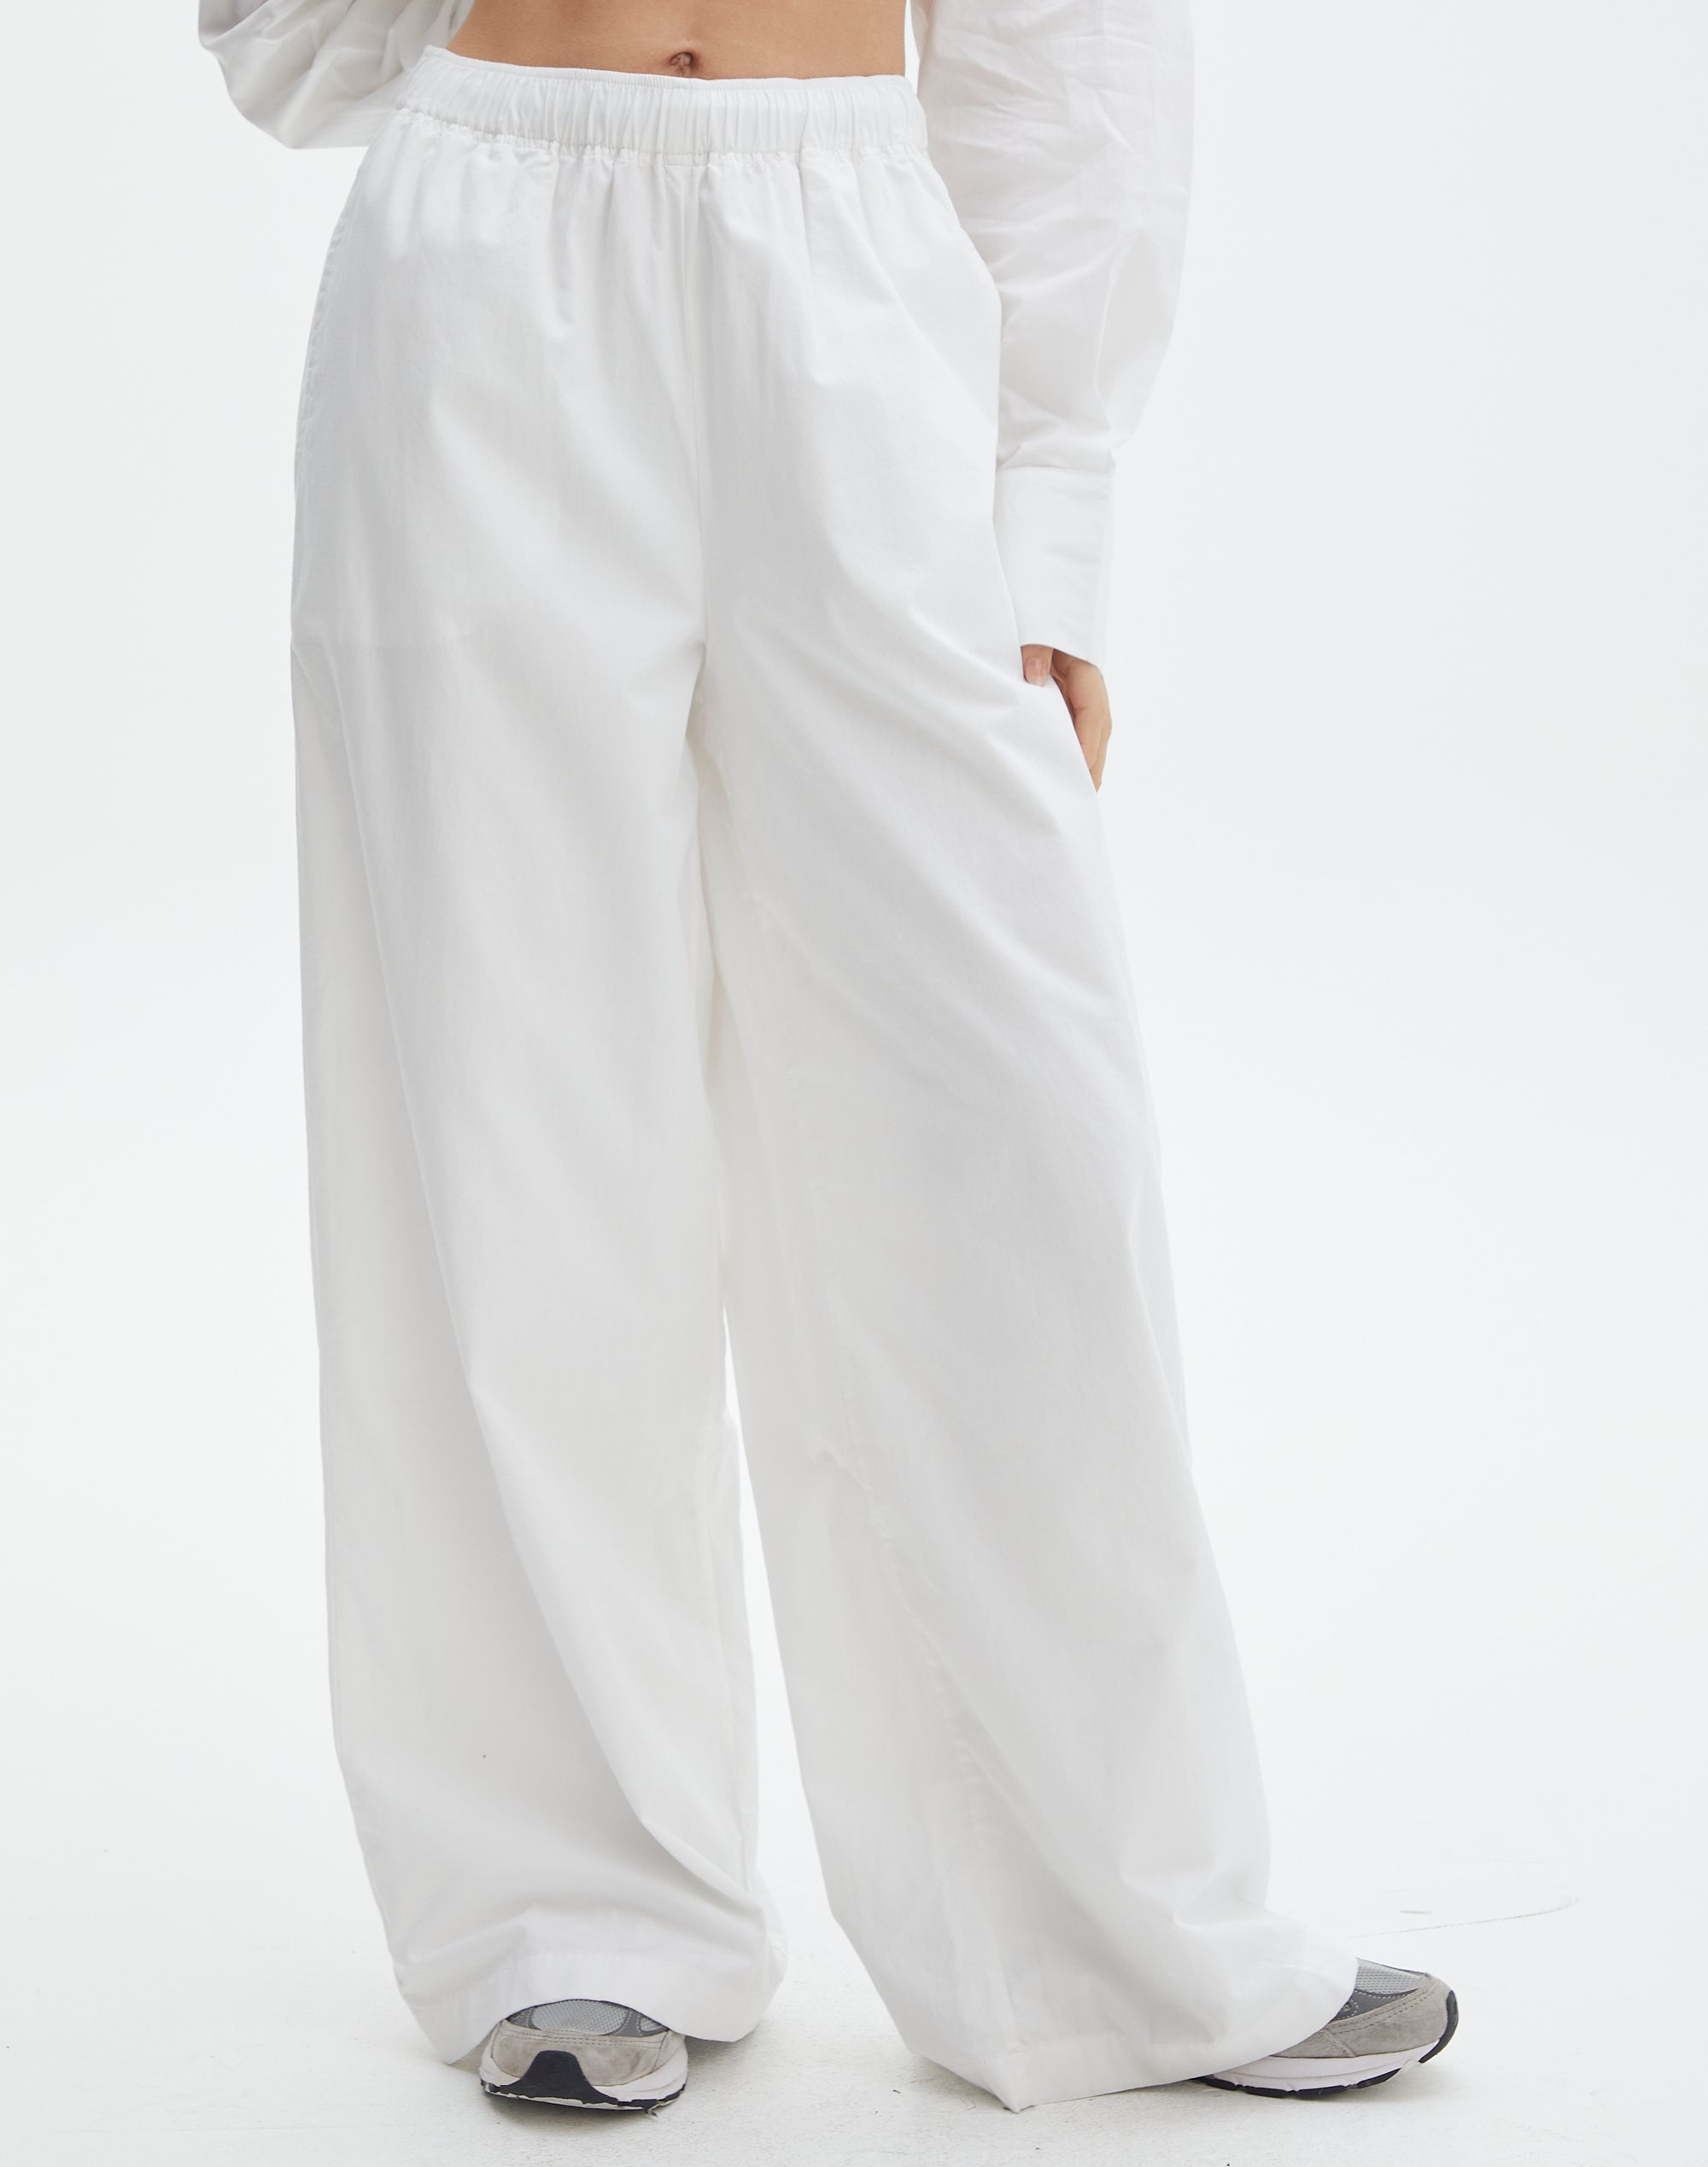 White Wide Leg Flared Jeans With Raw Edge | ADFY-WDJ-018 | Cilory.com